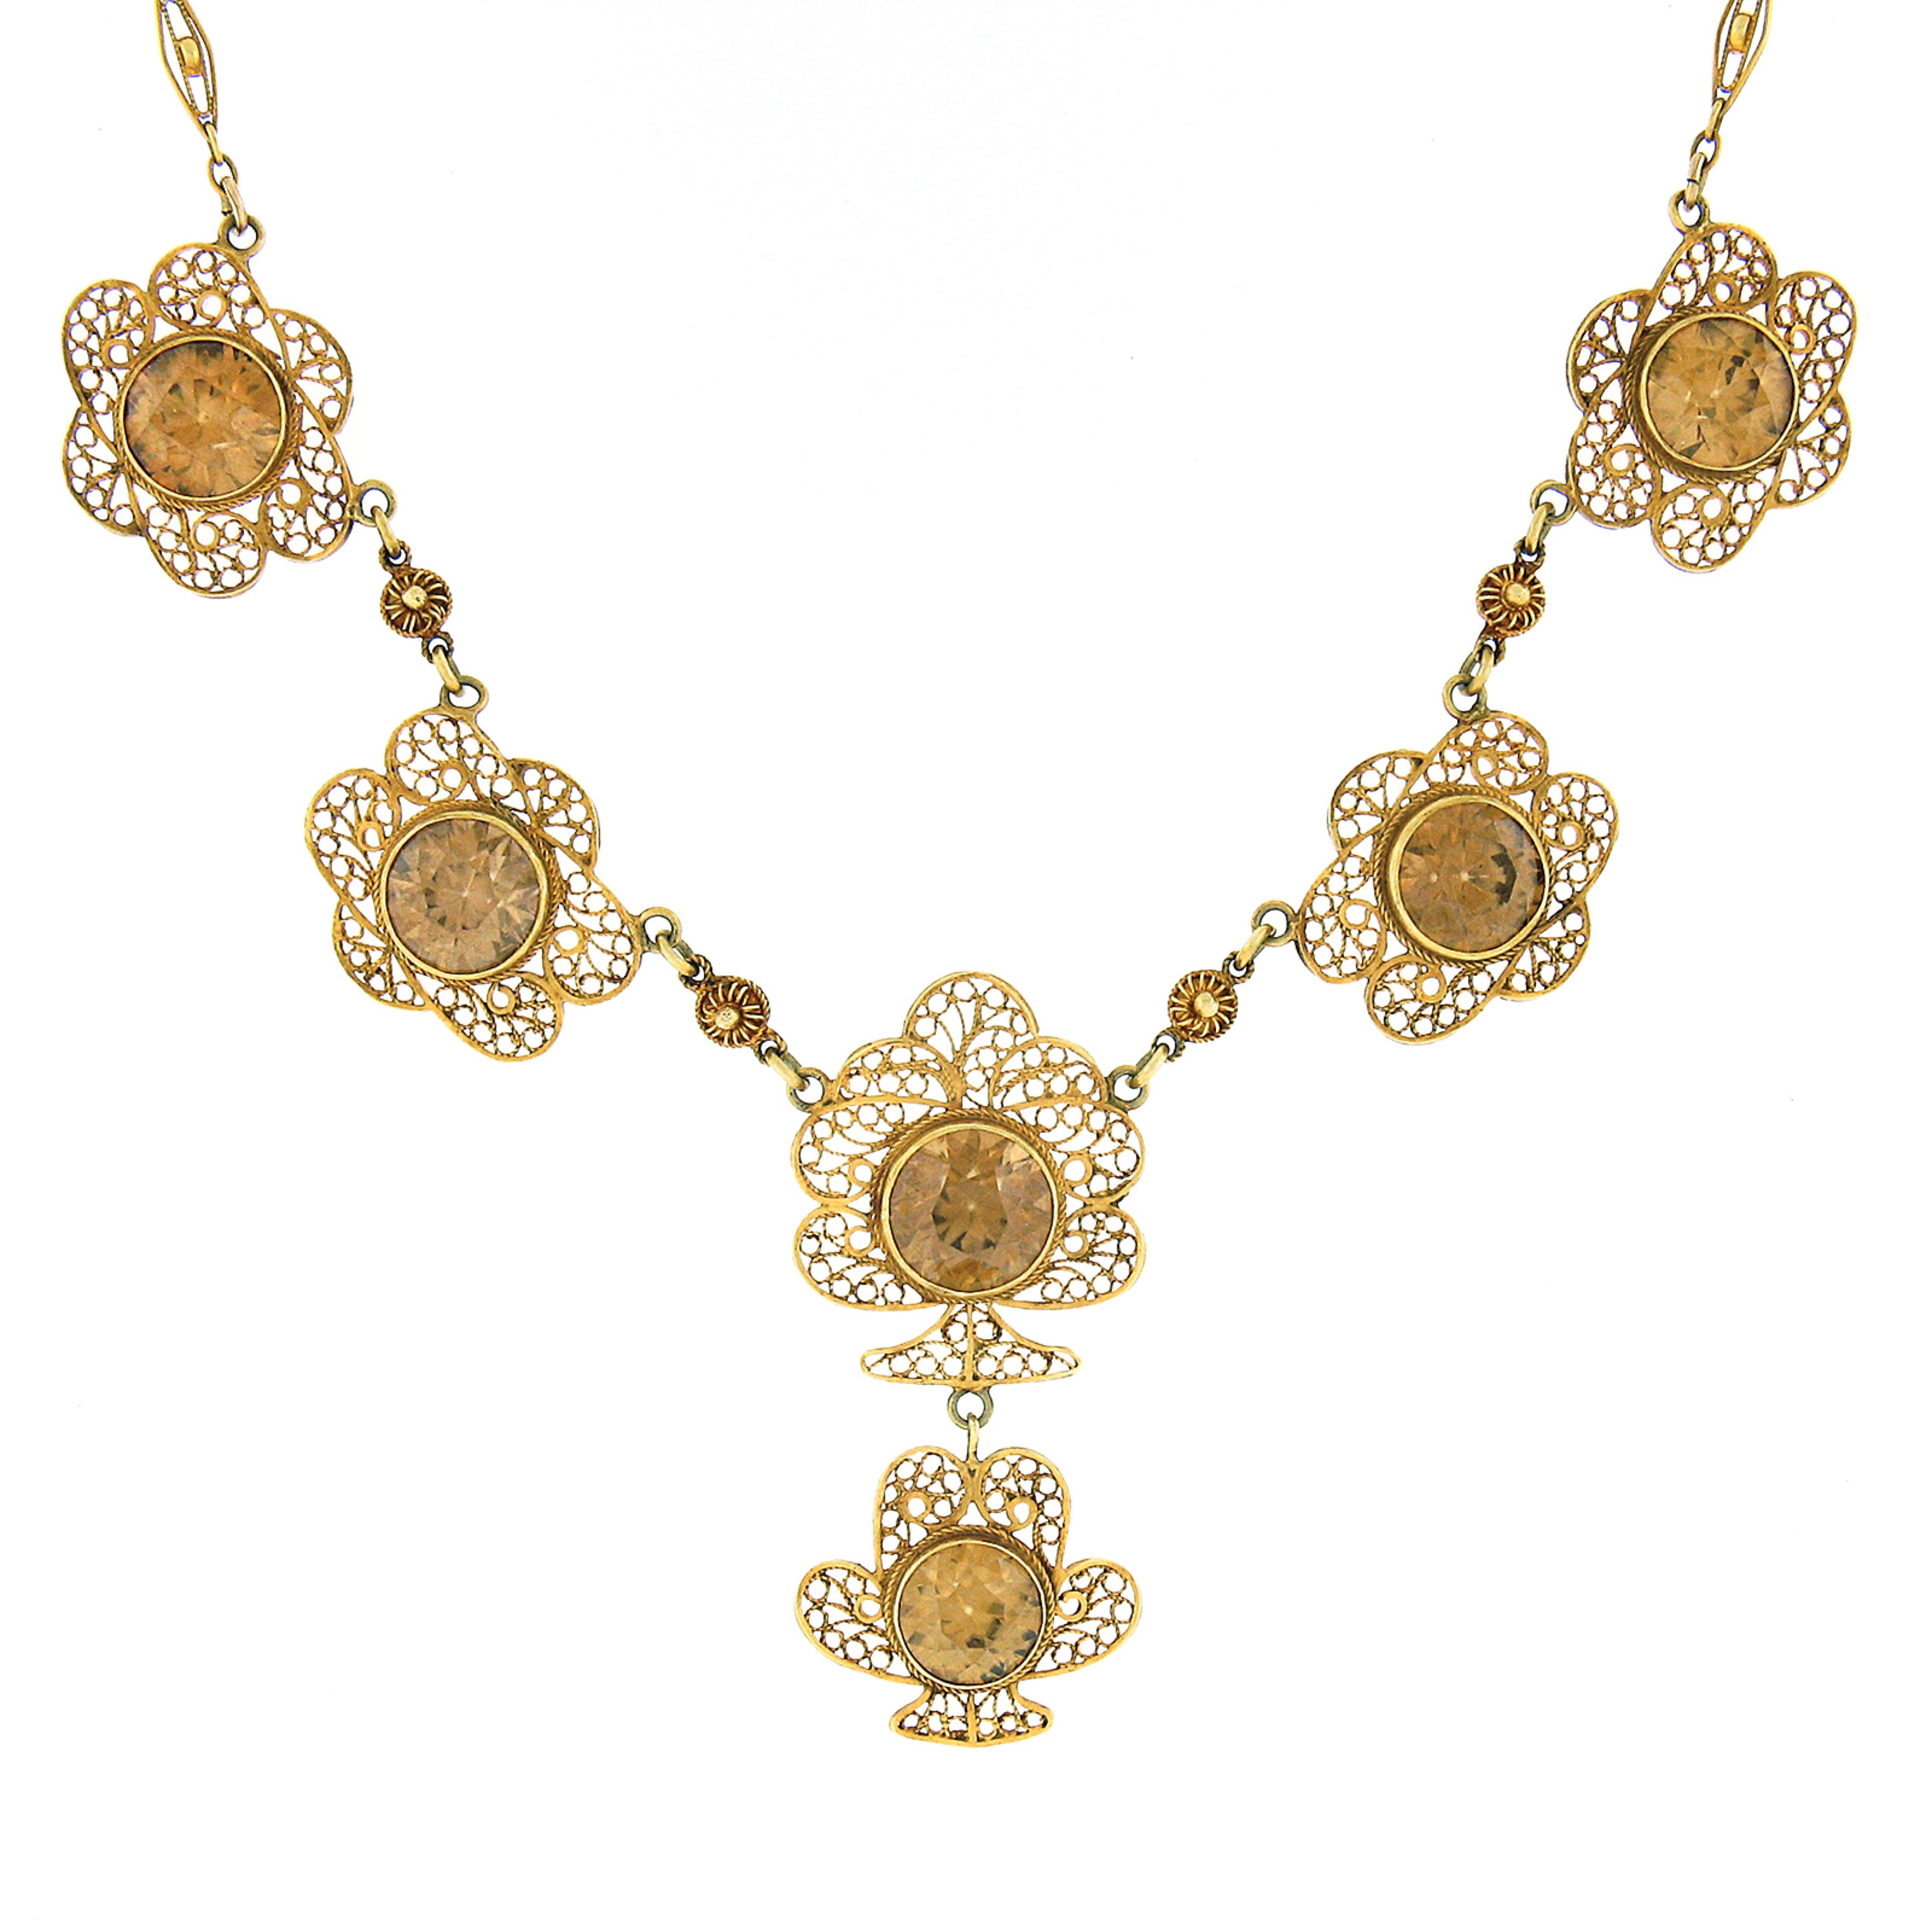 Antique 14K Gold 21.40ctw GIA Brownish Yellow Zircon Open Filigree Work Necklace In Good Condition For Sale In Montclair, NJ